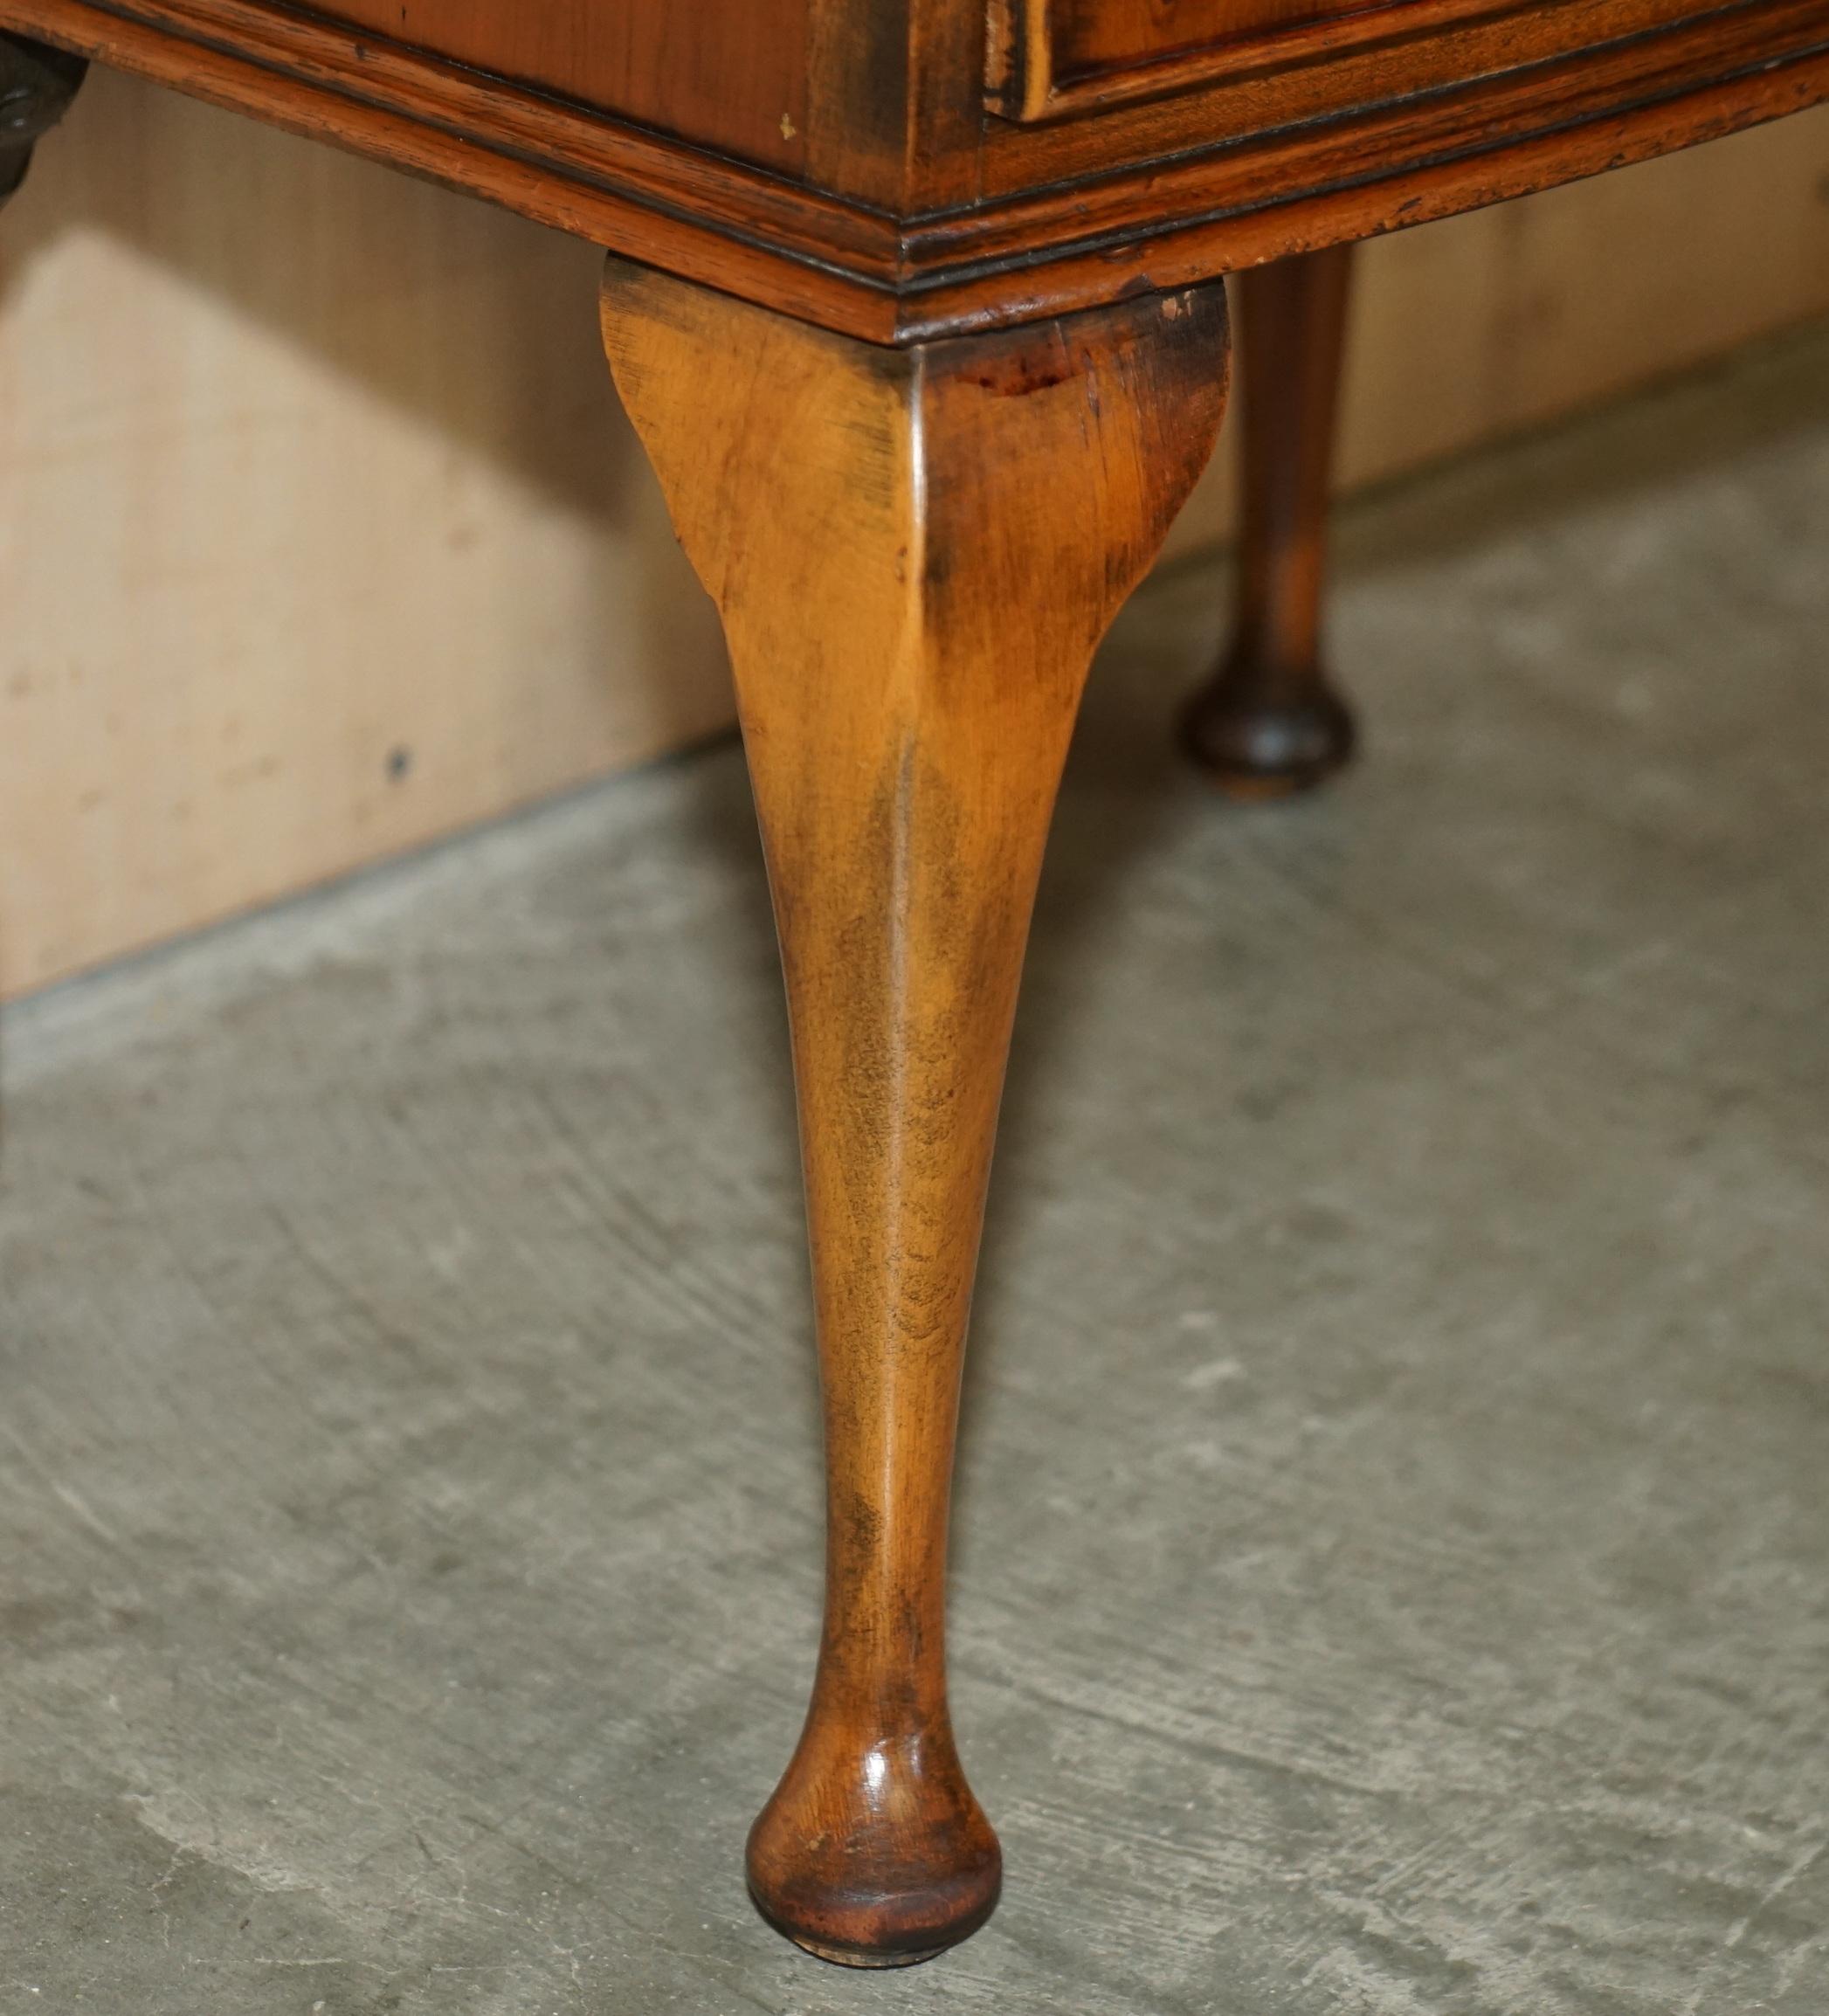 CIRCA 1940''s BURR YEW WOOD BOW FRONTED BEDSIDE SIDE TABLE CHEST OF DRAWERS im Angebot 1